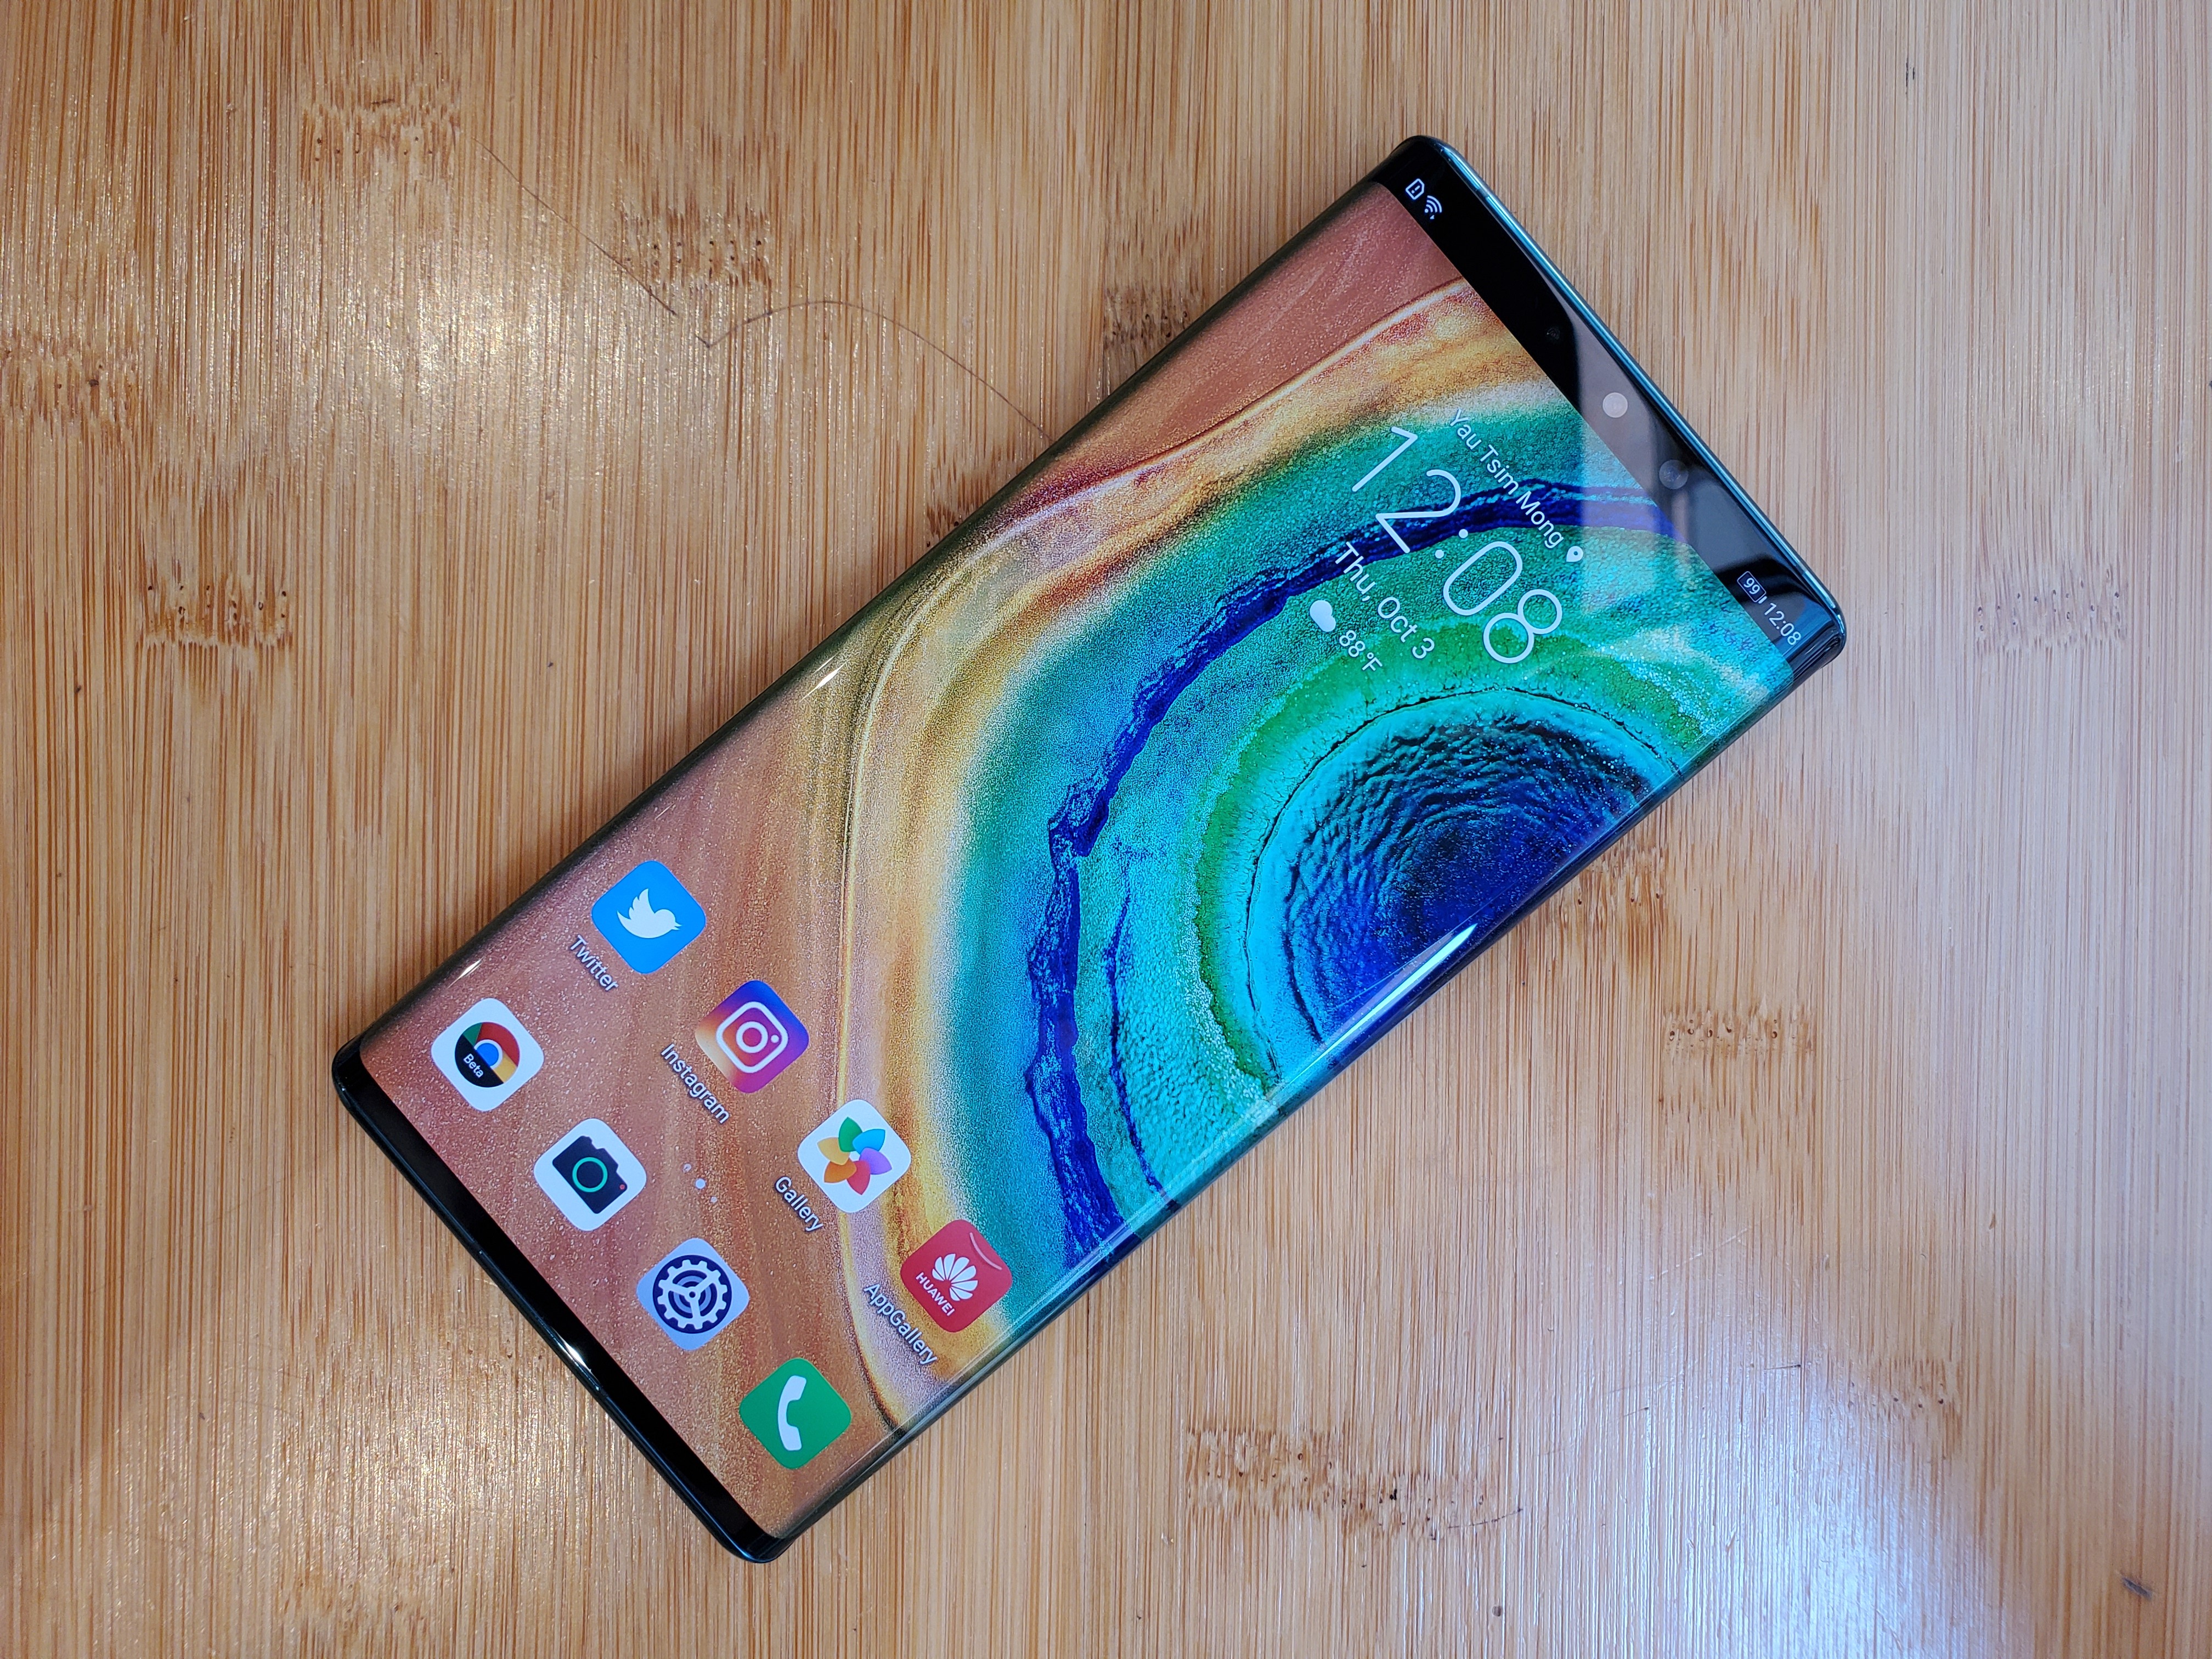 Leraar op school geweld Skiën Huawei Mate 30 Pro full review: excellent handset, but lack of Google apps  will be a deal-breaker for many | South China Morning Post